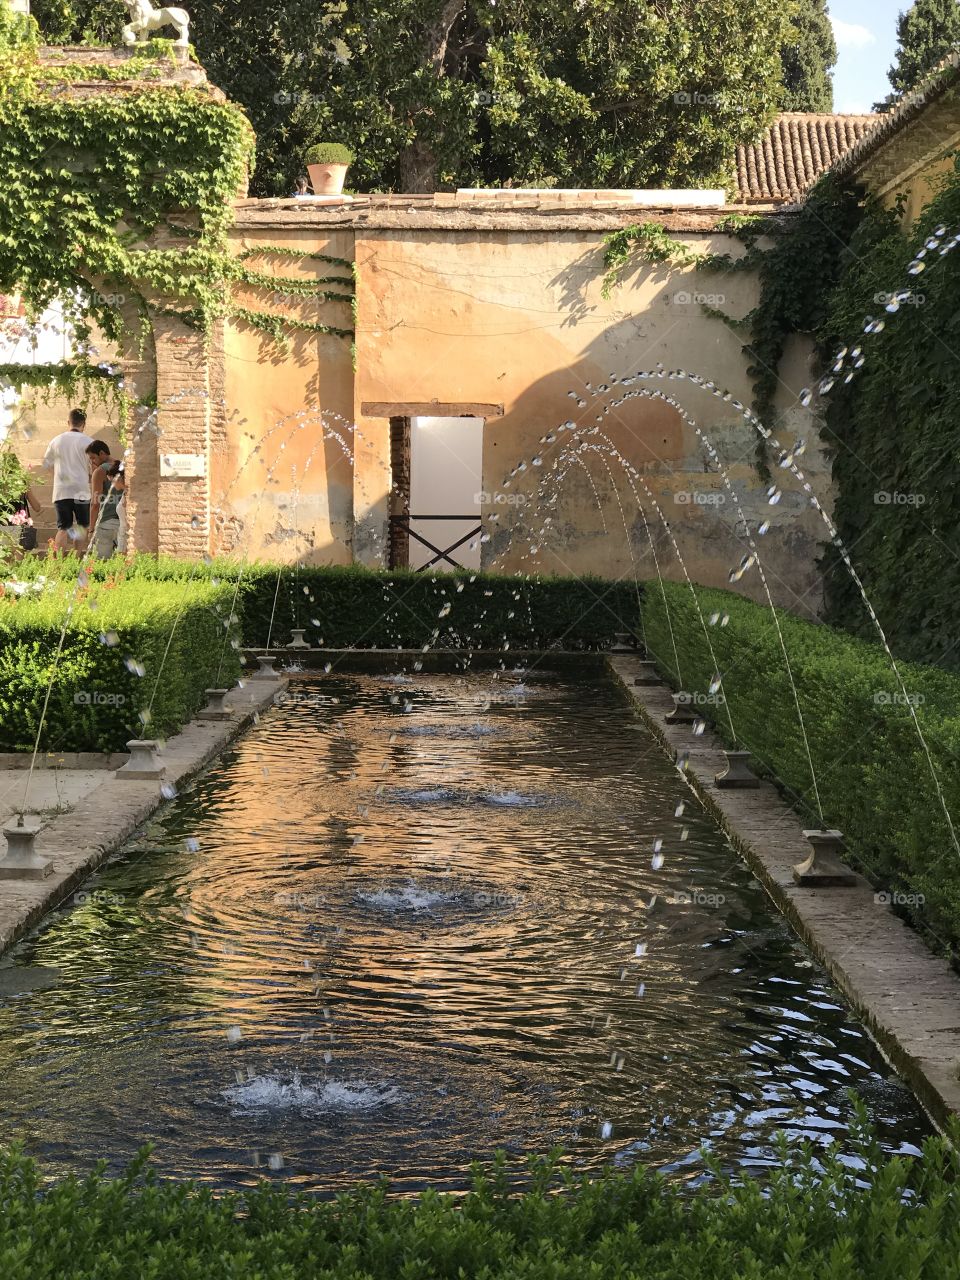 The Fountains of Alhambra 